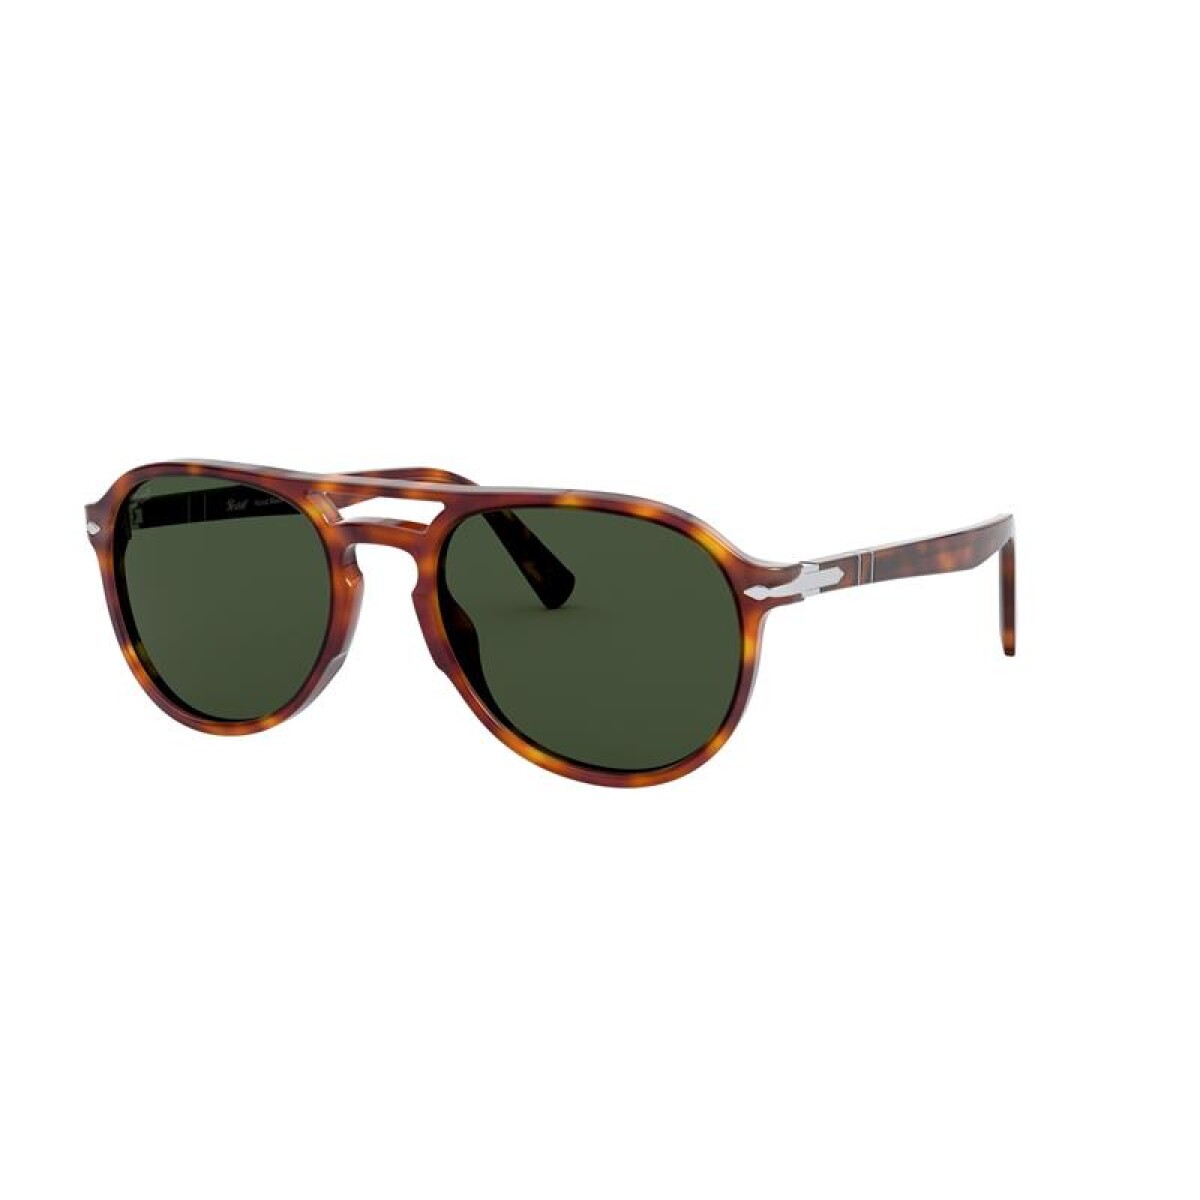 Persol 3235-s - 24/31 